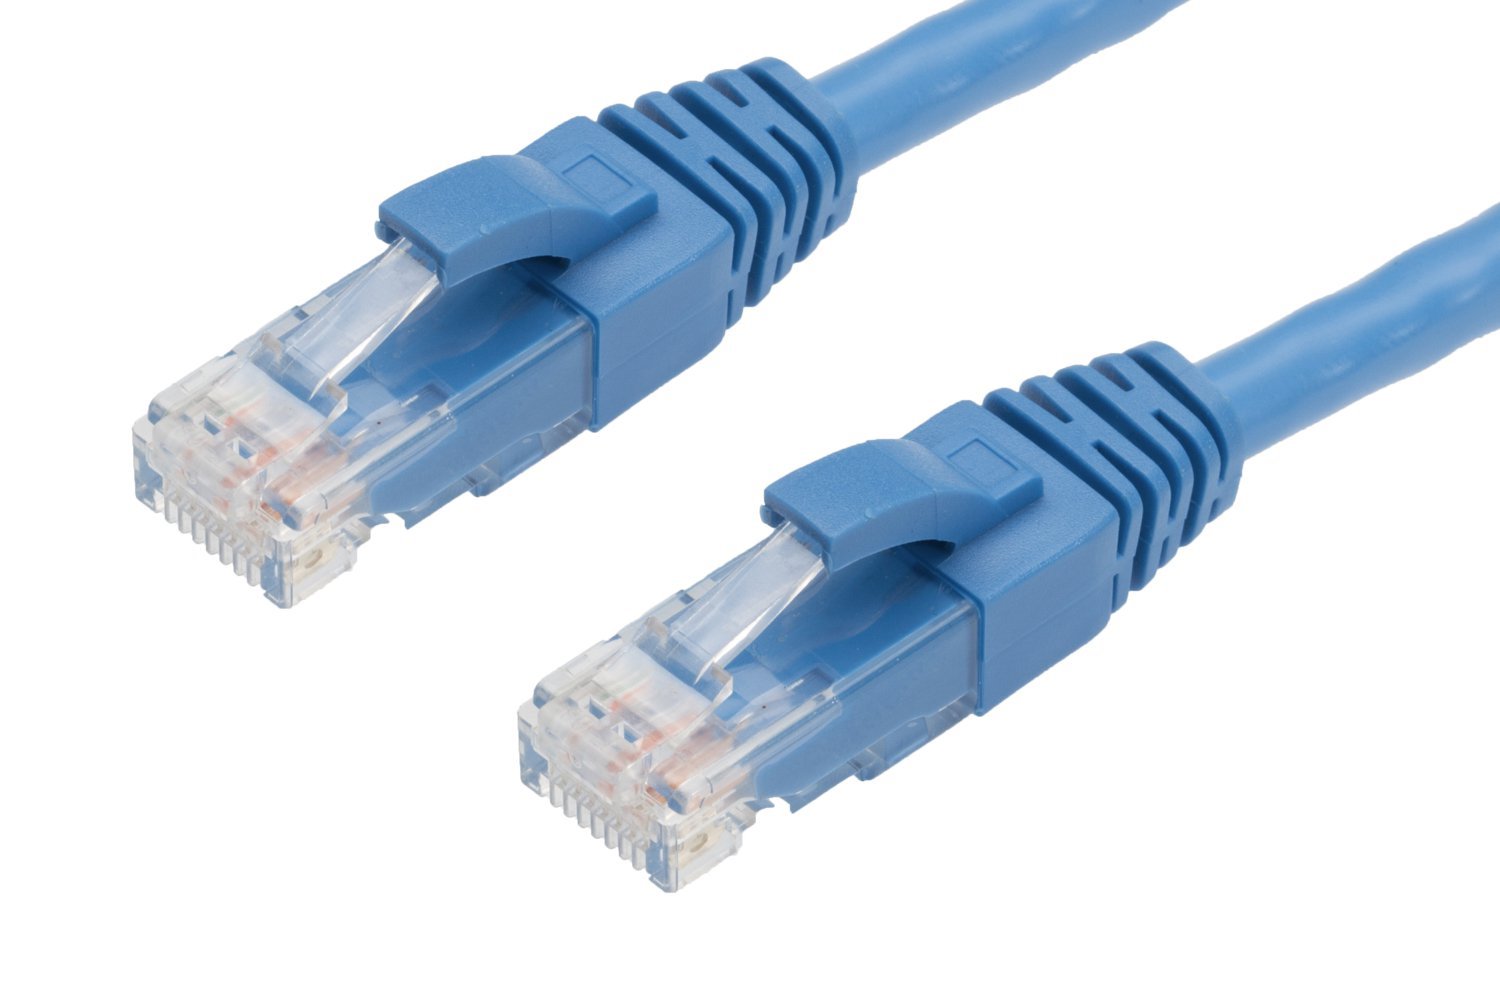 4Cabling 5M Cat 6 Ethernet Network Cable: Blue